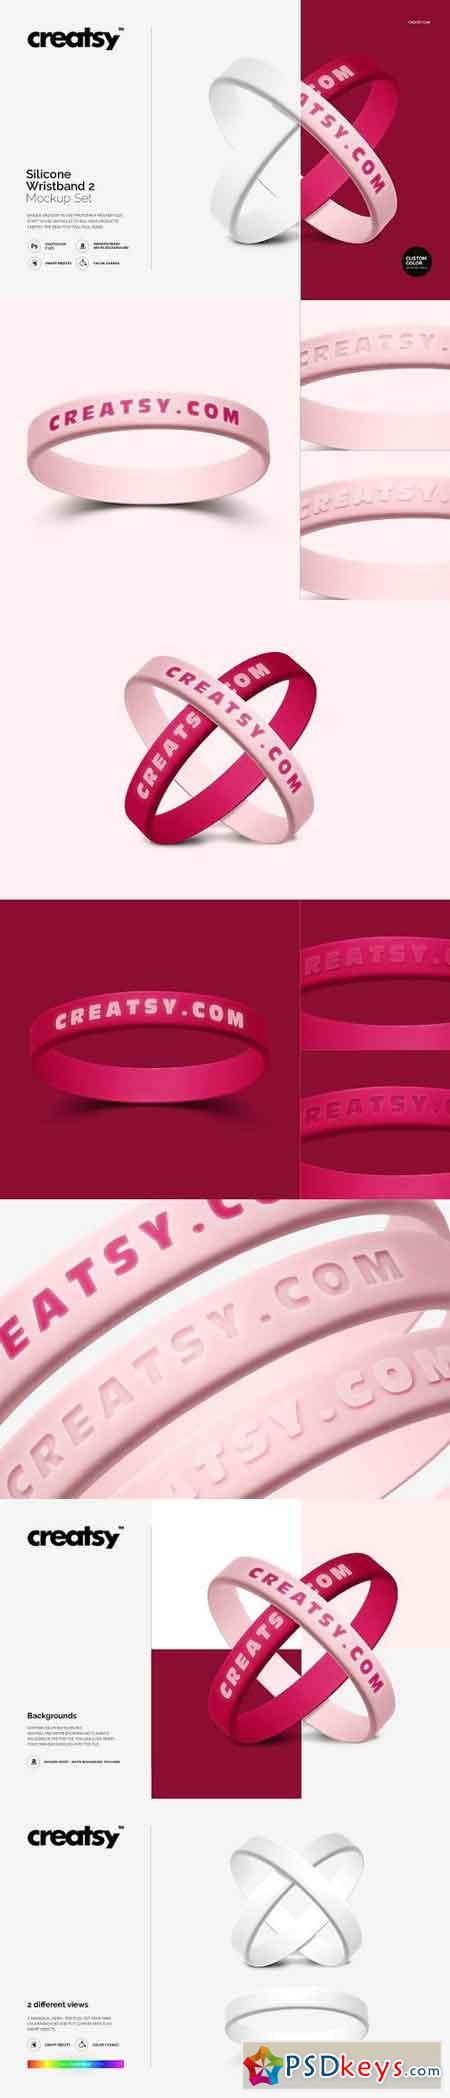 Download Silicone Wristband 2 Mockup Set 1196561 » Free Download Photoshop Vector Stock image Via Torrent ...